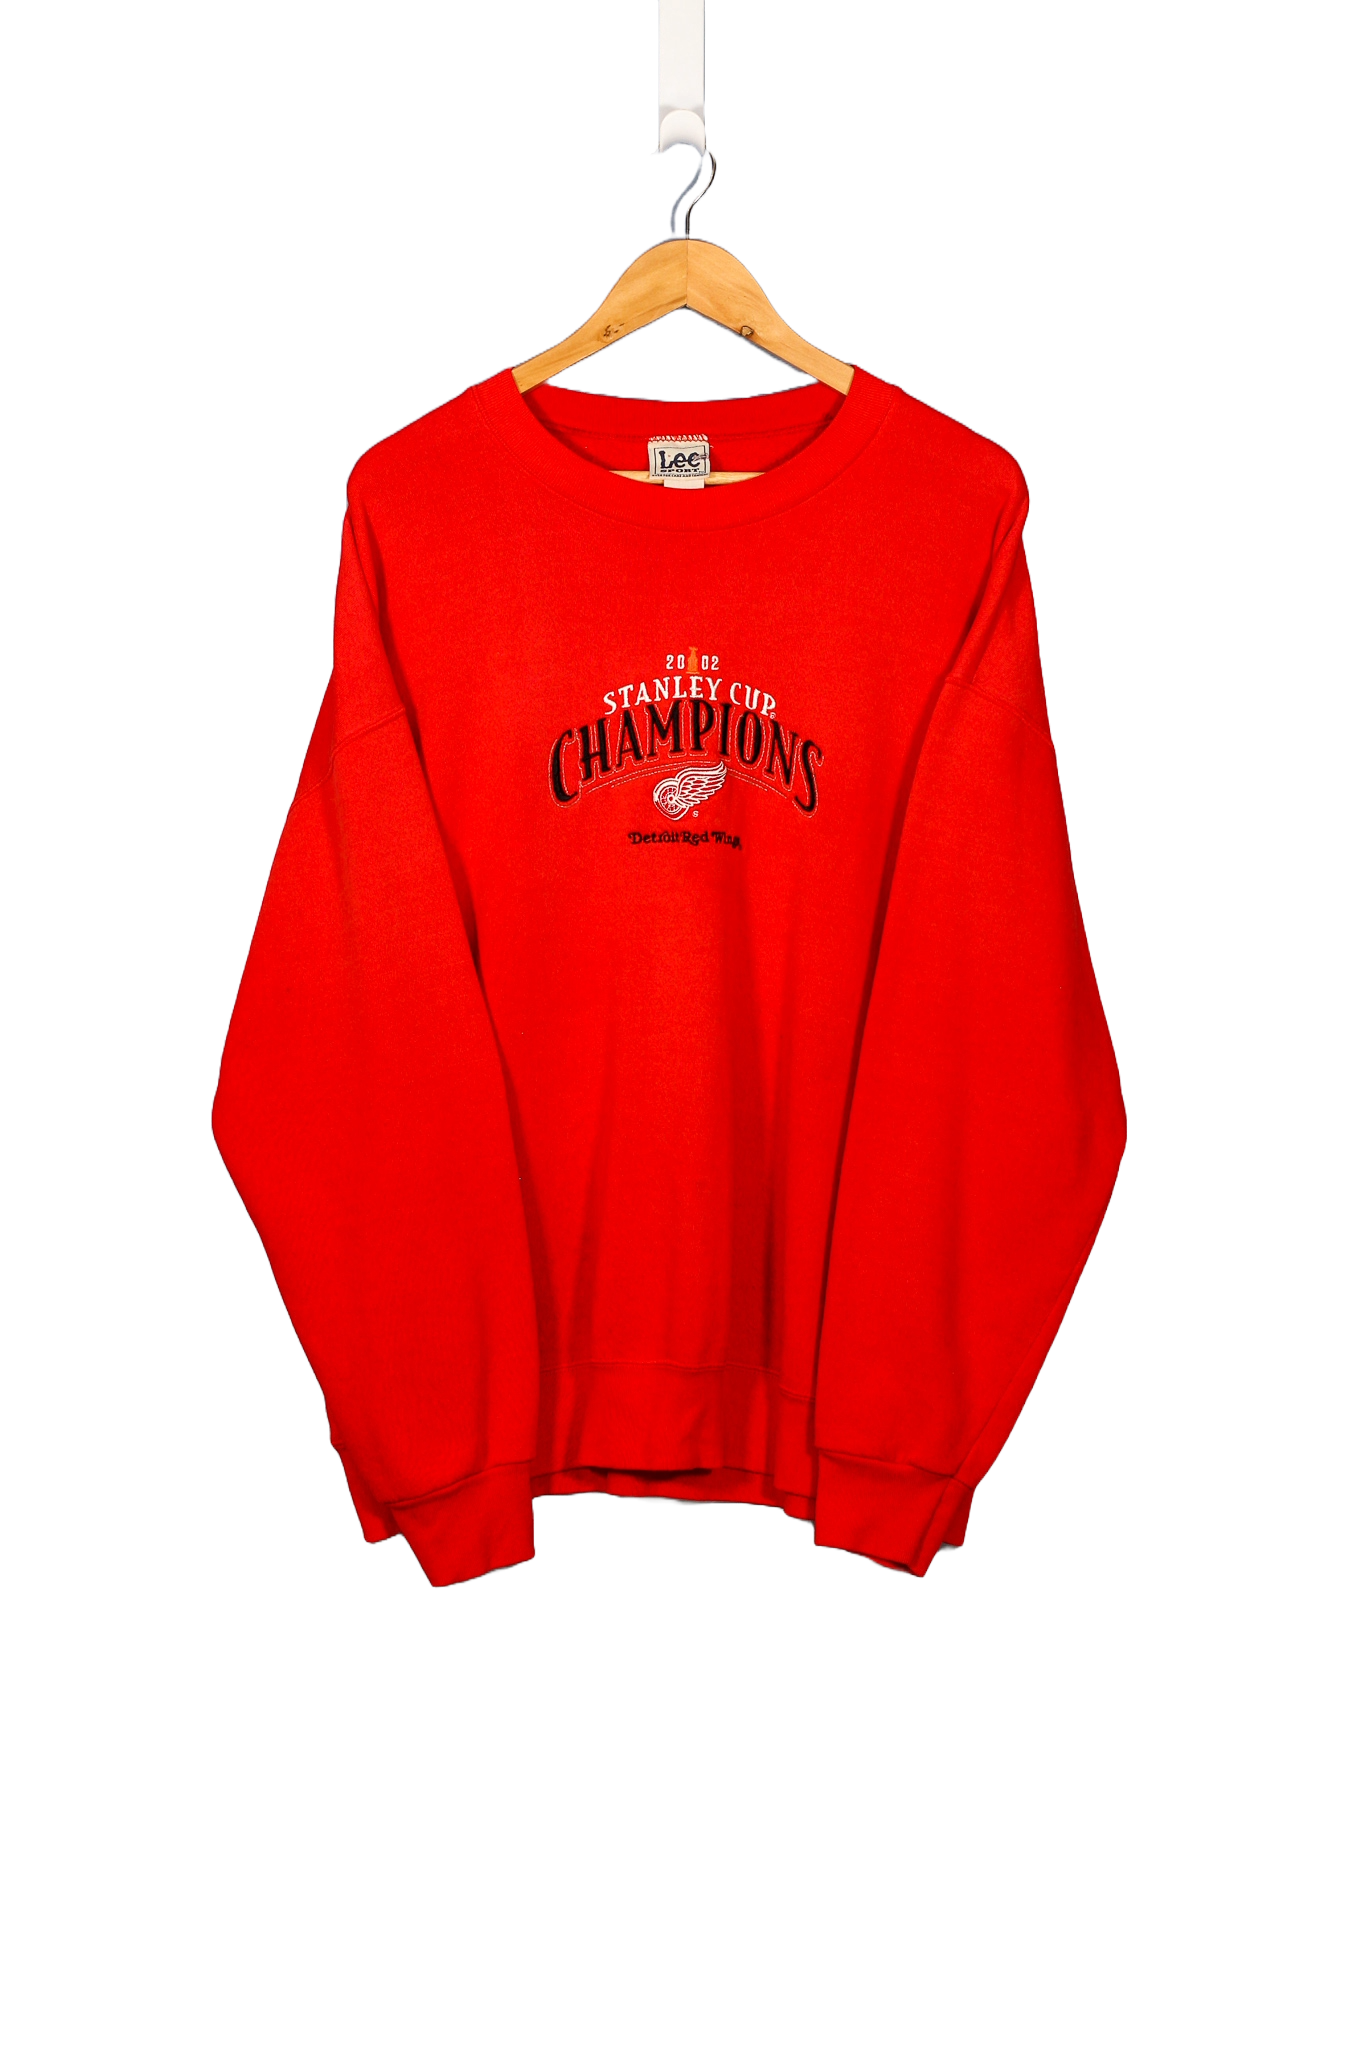 Vintage 2002 Detroits Red Wings Stanley Cup Champions Embroidered NHL Crewneck - XL